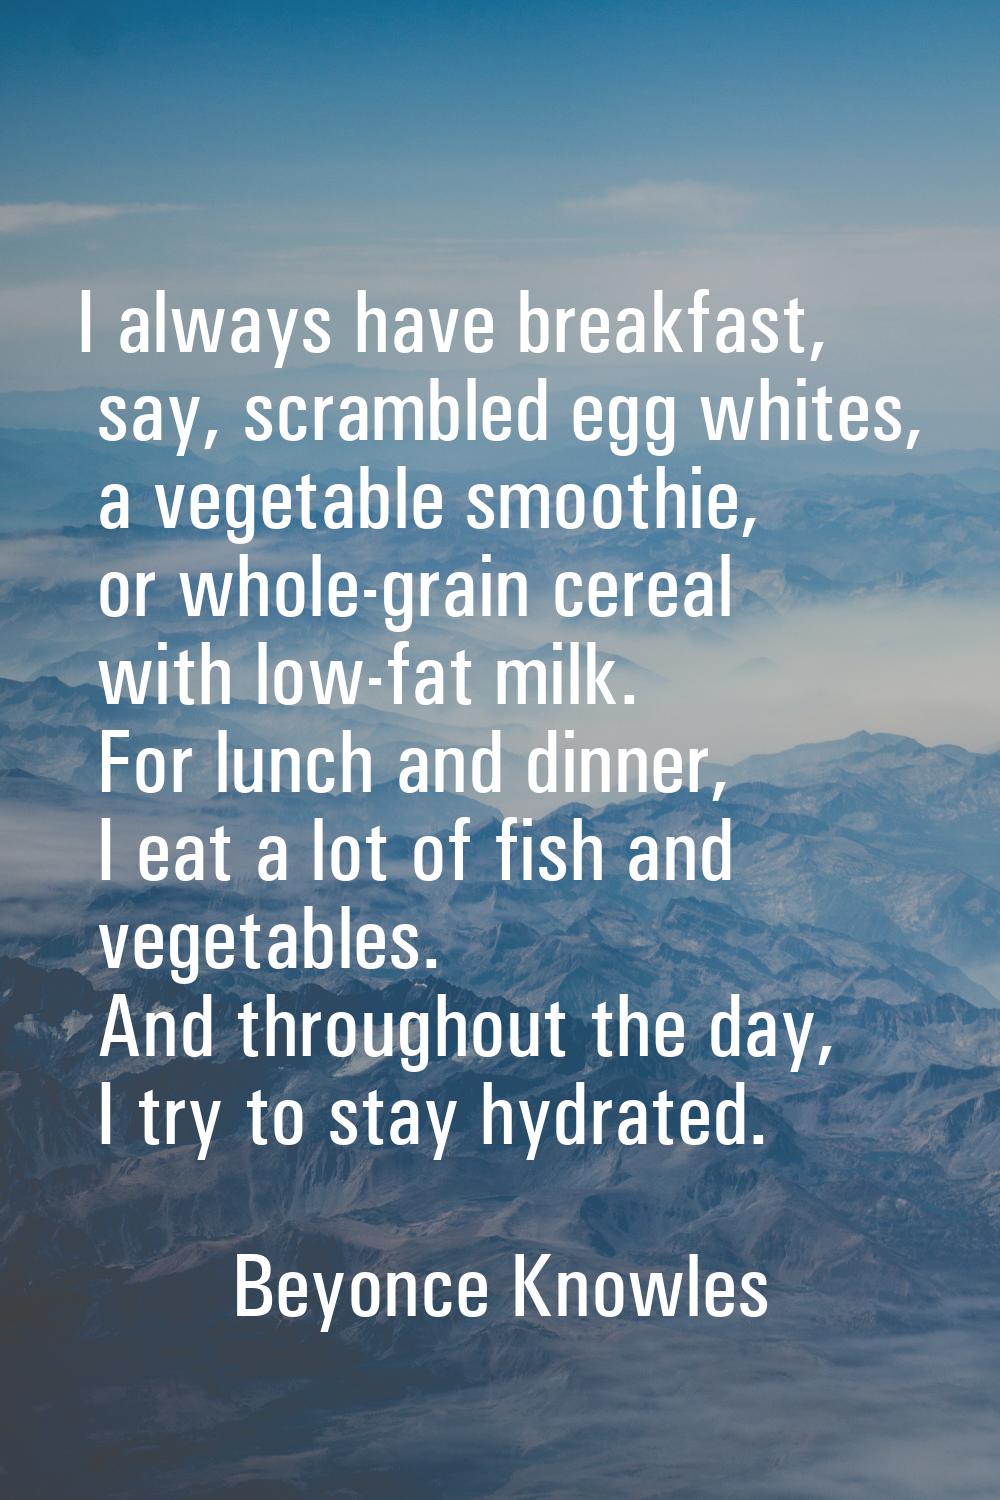 I always have breakfast, say, scrambled egg whites, a vegetable smoothie, or whole-grain cereal wit